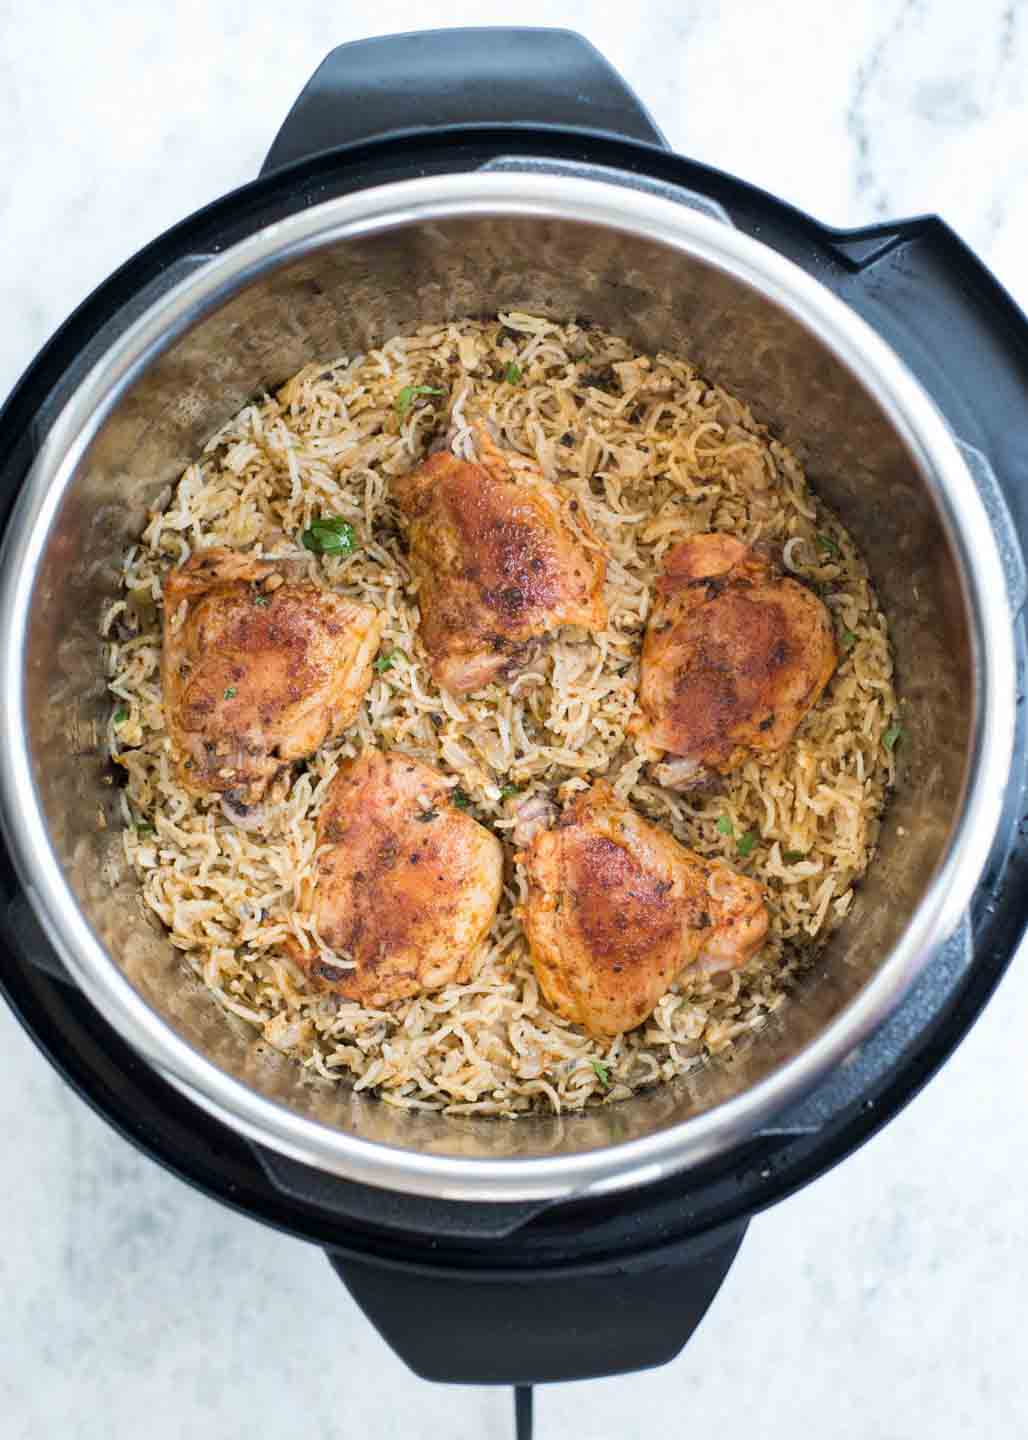 Instant Pot Chicken and Rice made in the Instant Pot with fluffy buttery rice and Juicy Chicken thighs made in 20 minutes